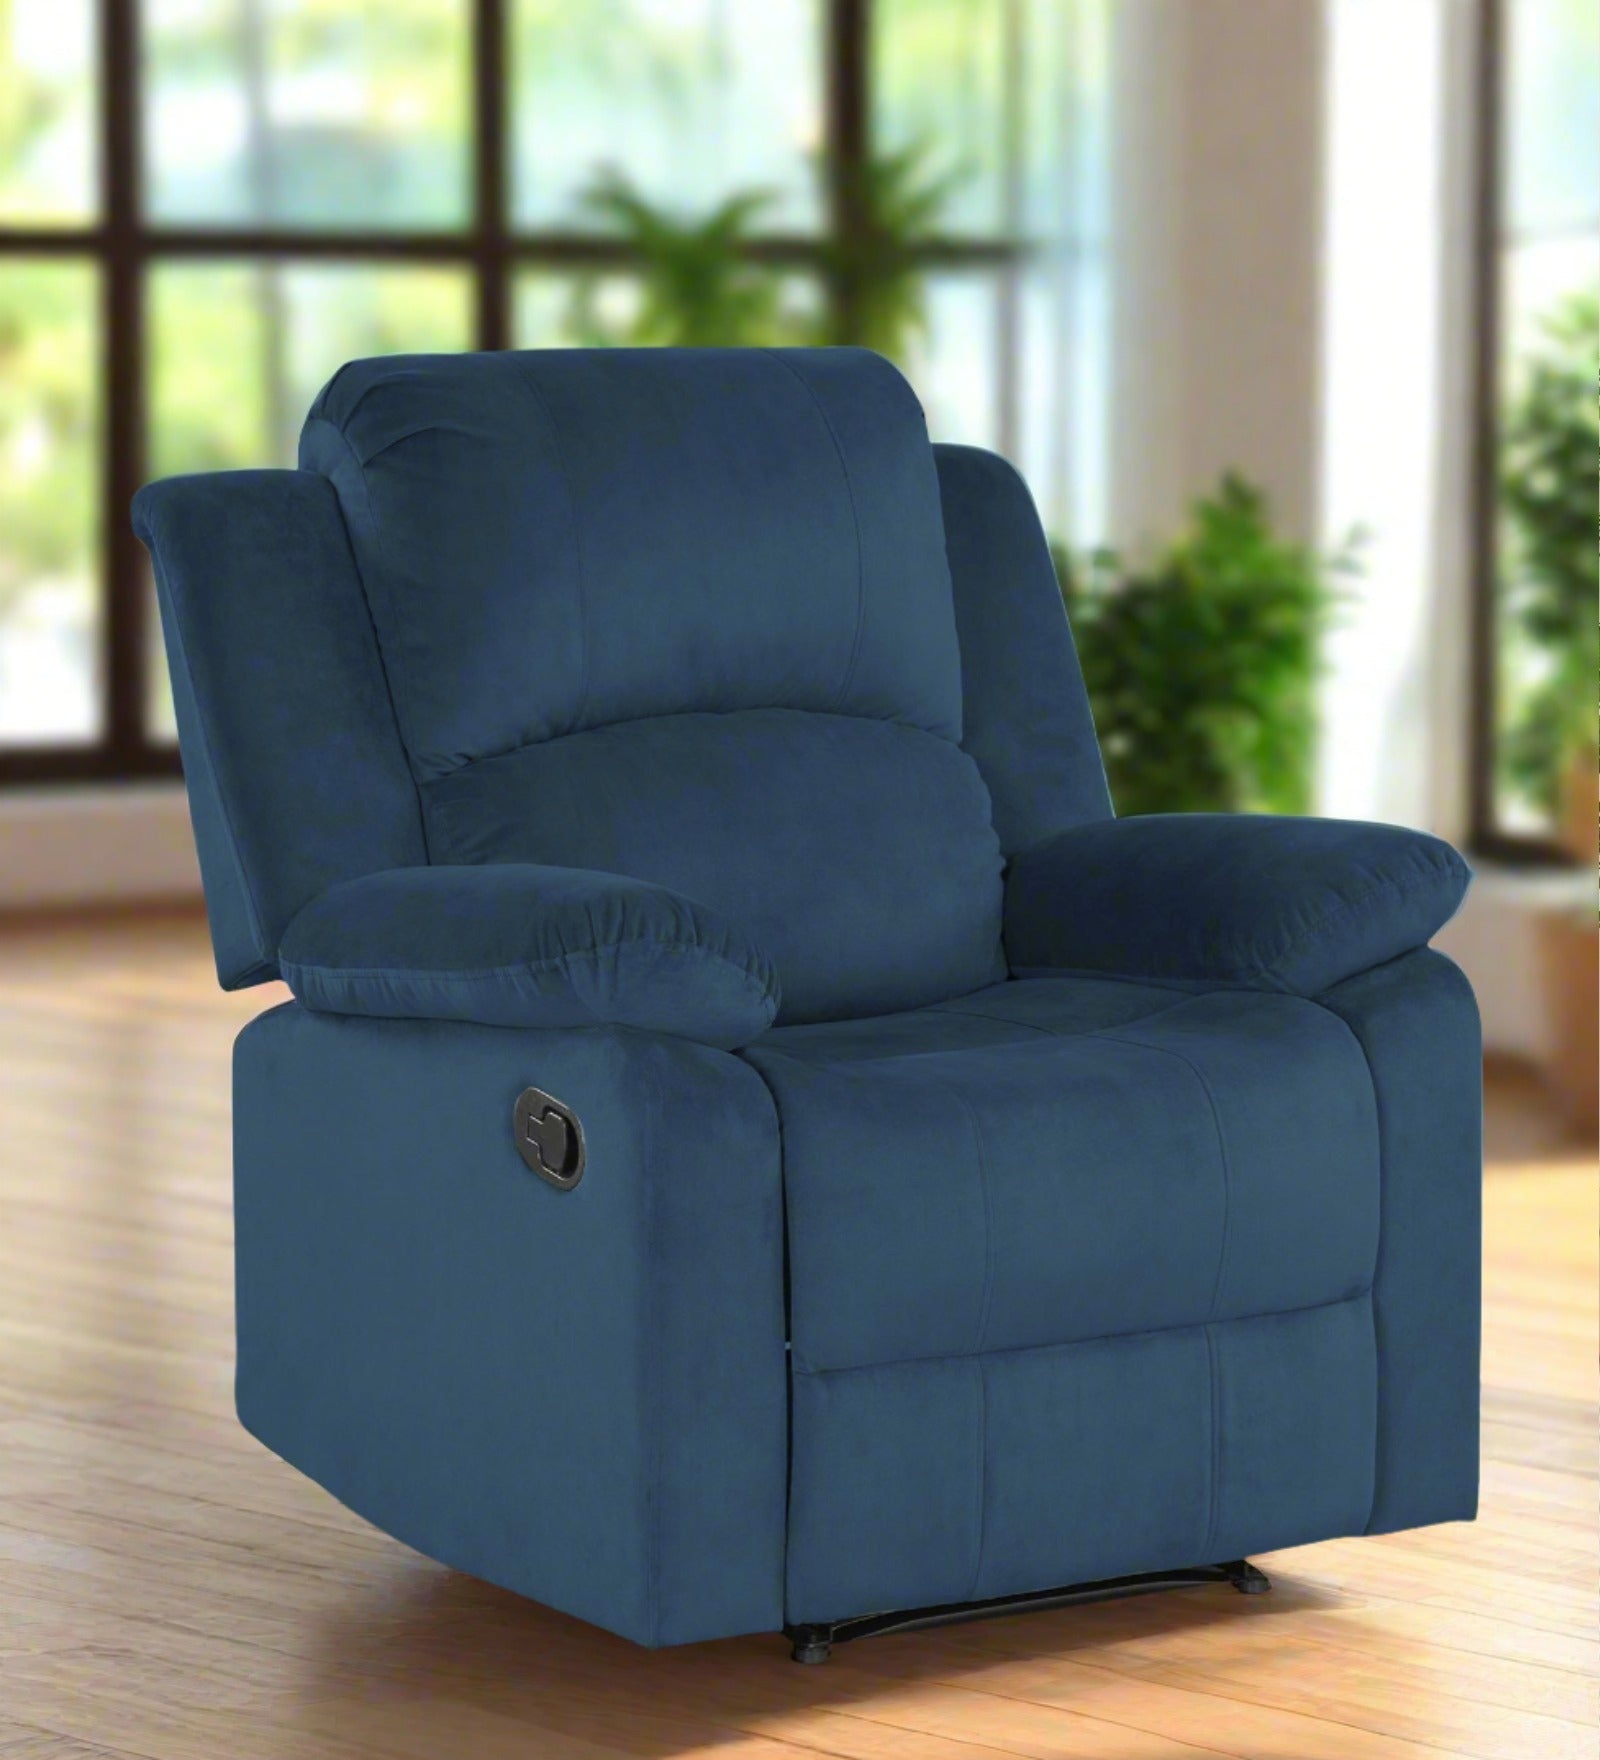 Henry Fabric Manual 1 Seater Recliner In Light Blue Colour